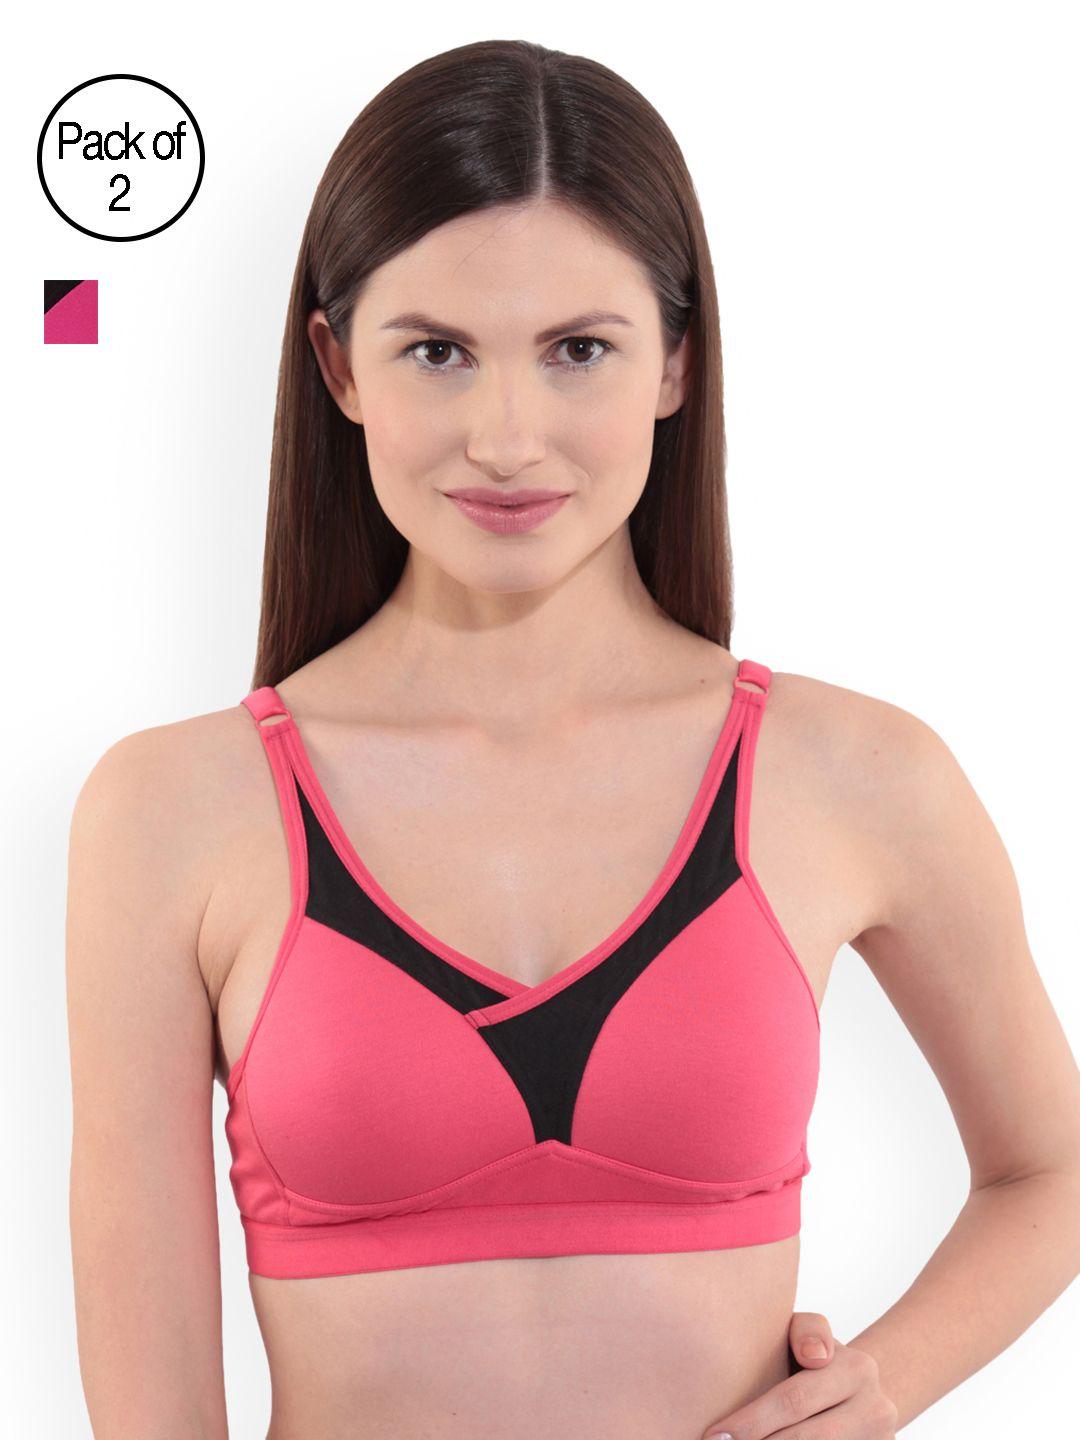 floret pack of 2 solid non-wired heavily padded sports bras t3001_magenta